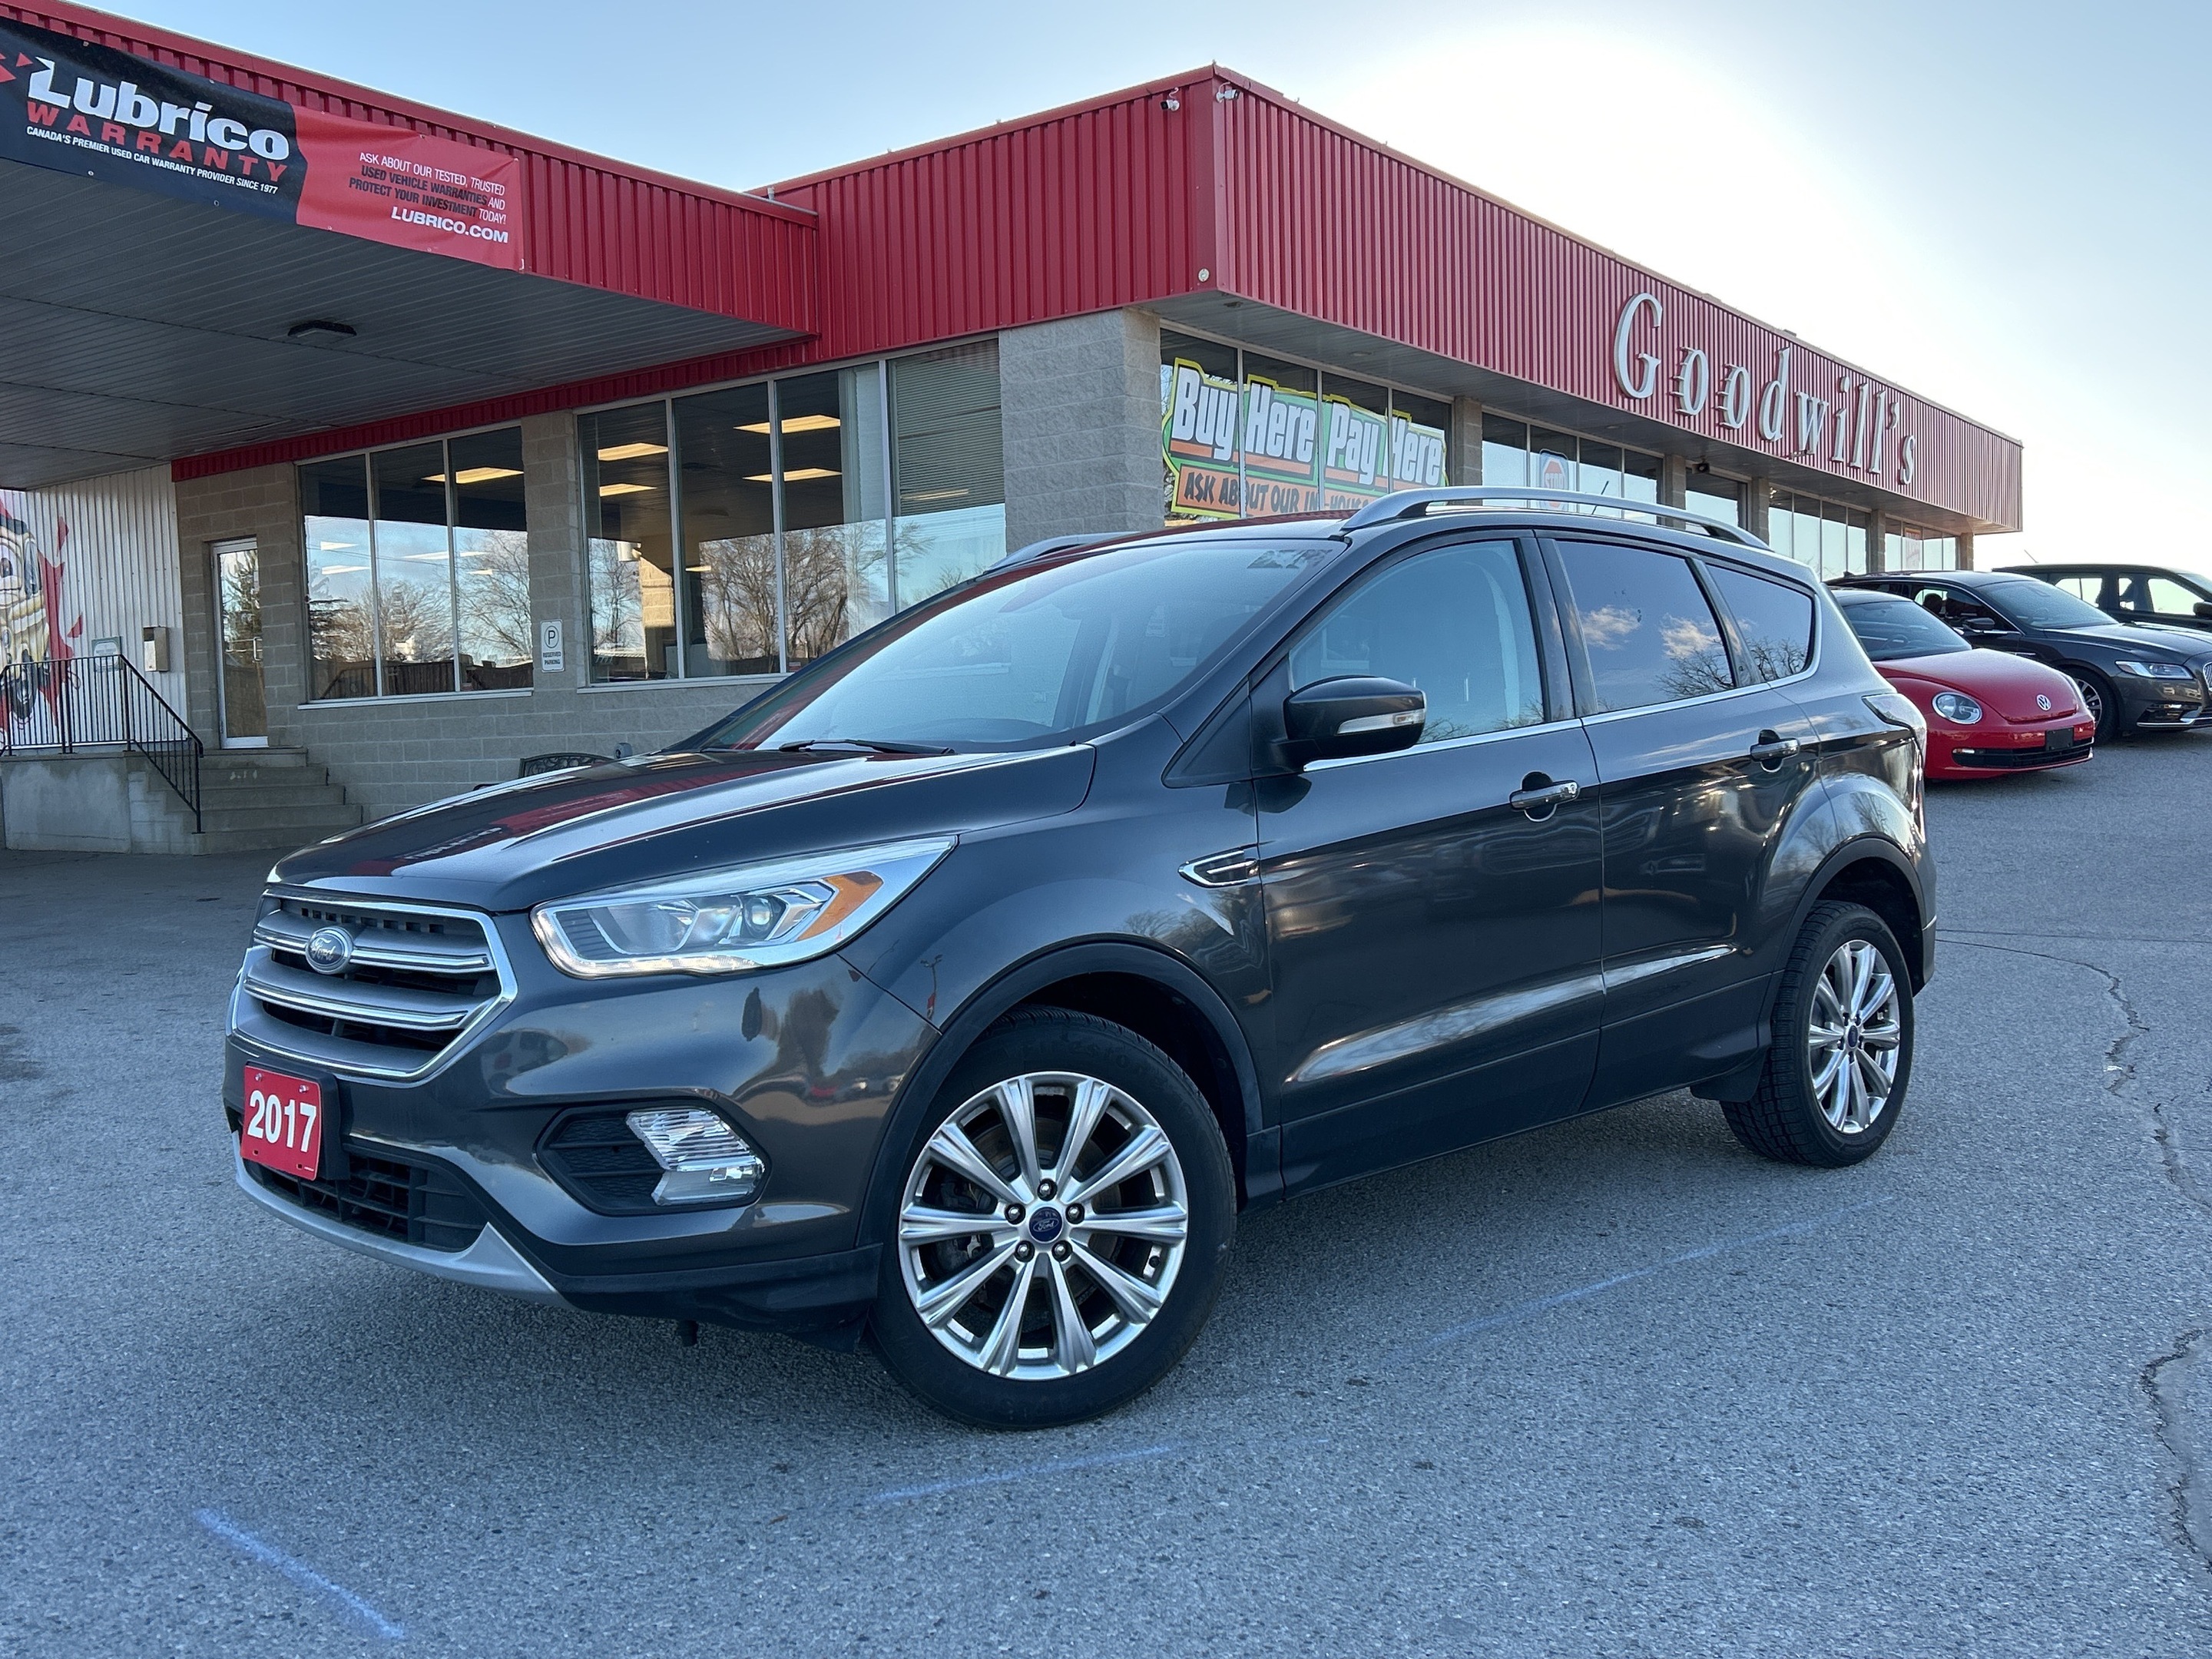 2017 Ford Escape LEATHER, SUNROOF, NAV, REMOTE START!